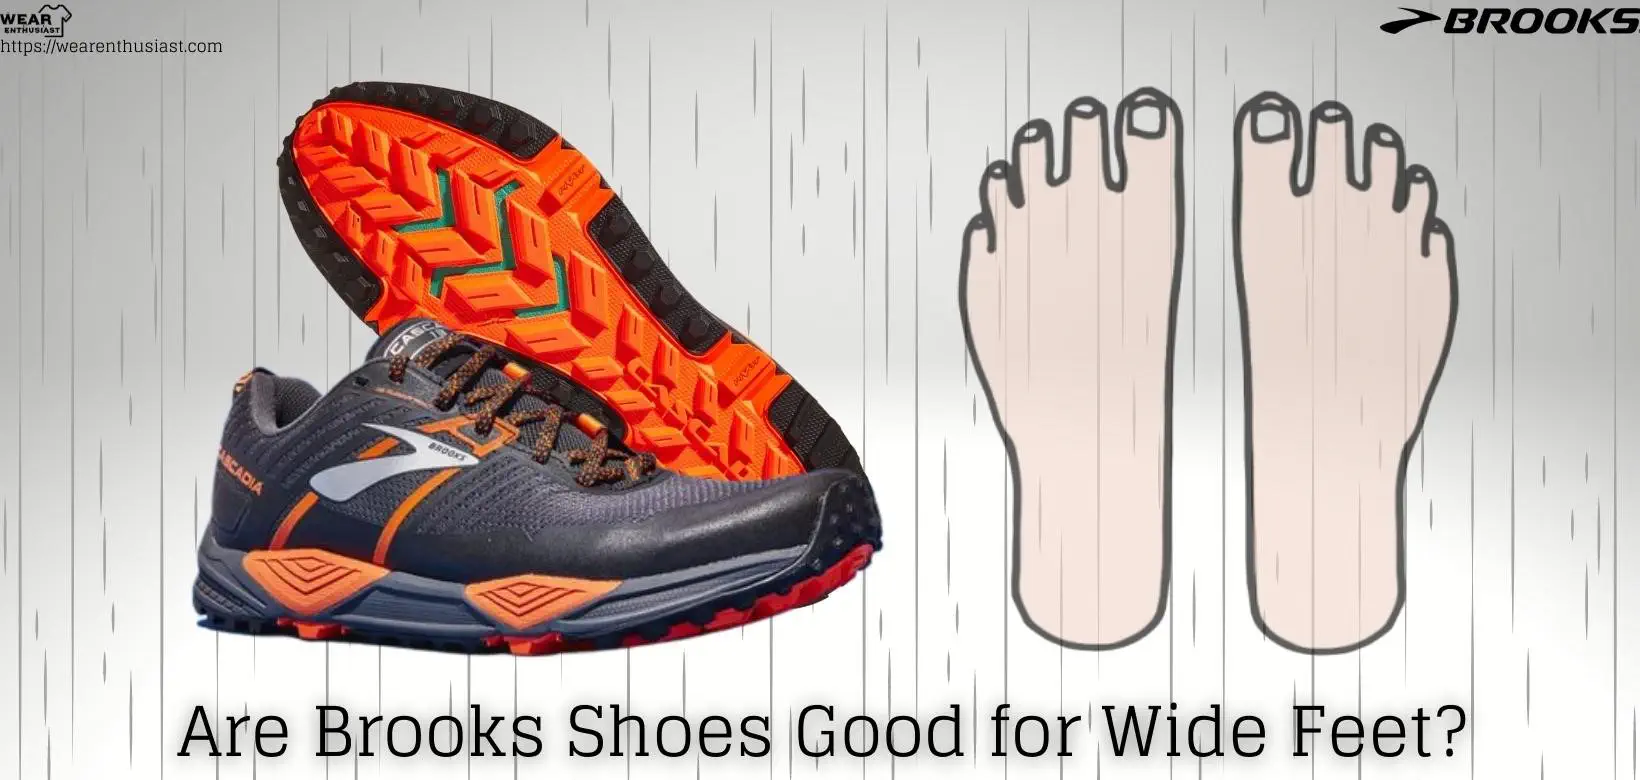 Are Brooks Shoes Good for Wide Feet?